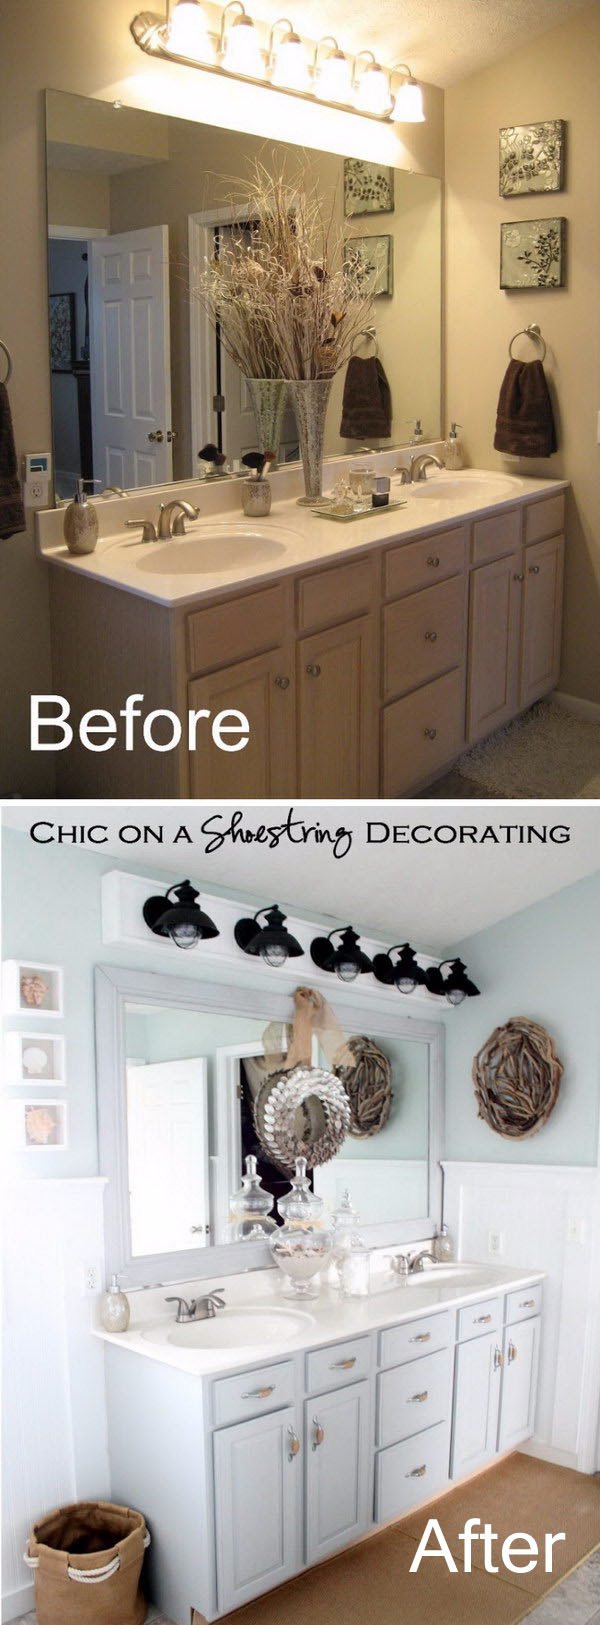 61-bathroom-remodel-before-and-after